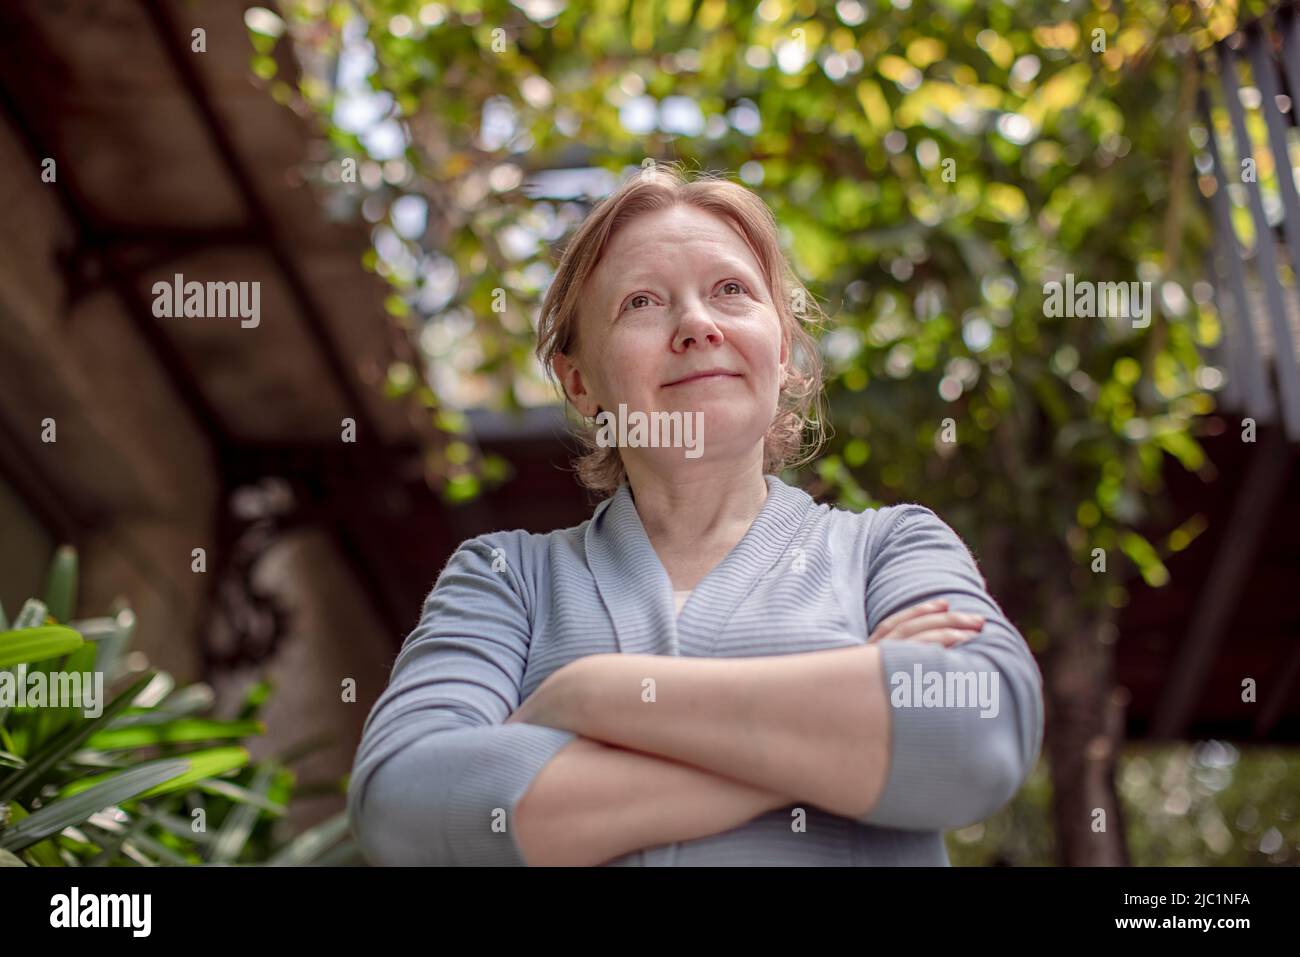 Low angle view of a mature woman standing in the garden and thinking Stock Photo